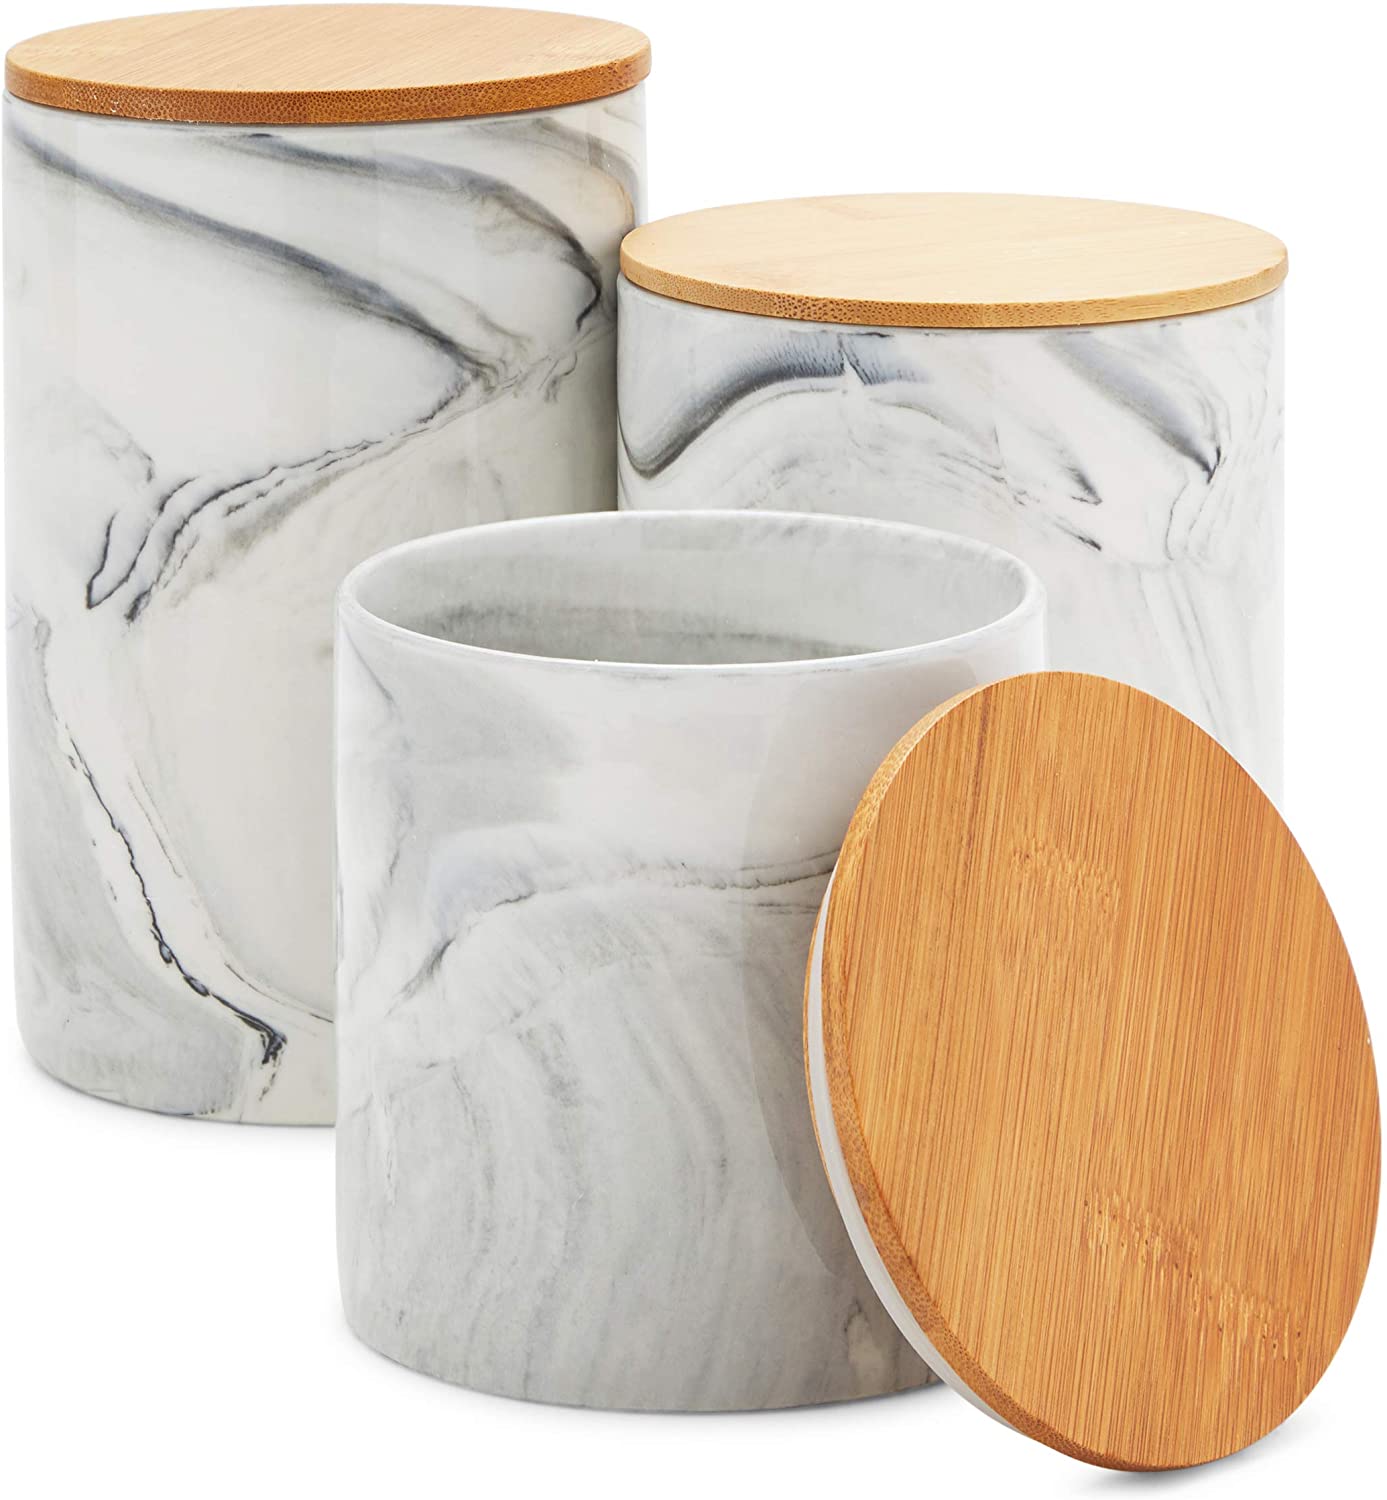 Kitchen Canisters with Bamboo Lids, Airtight Ceramic Canister Set